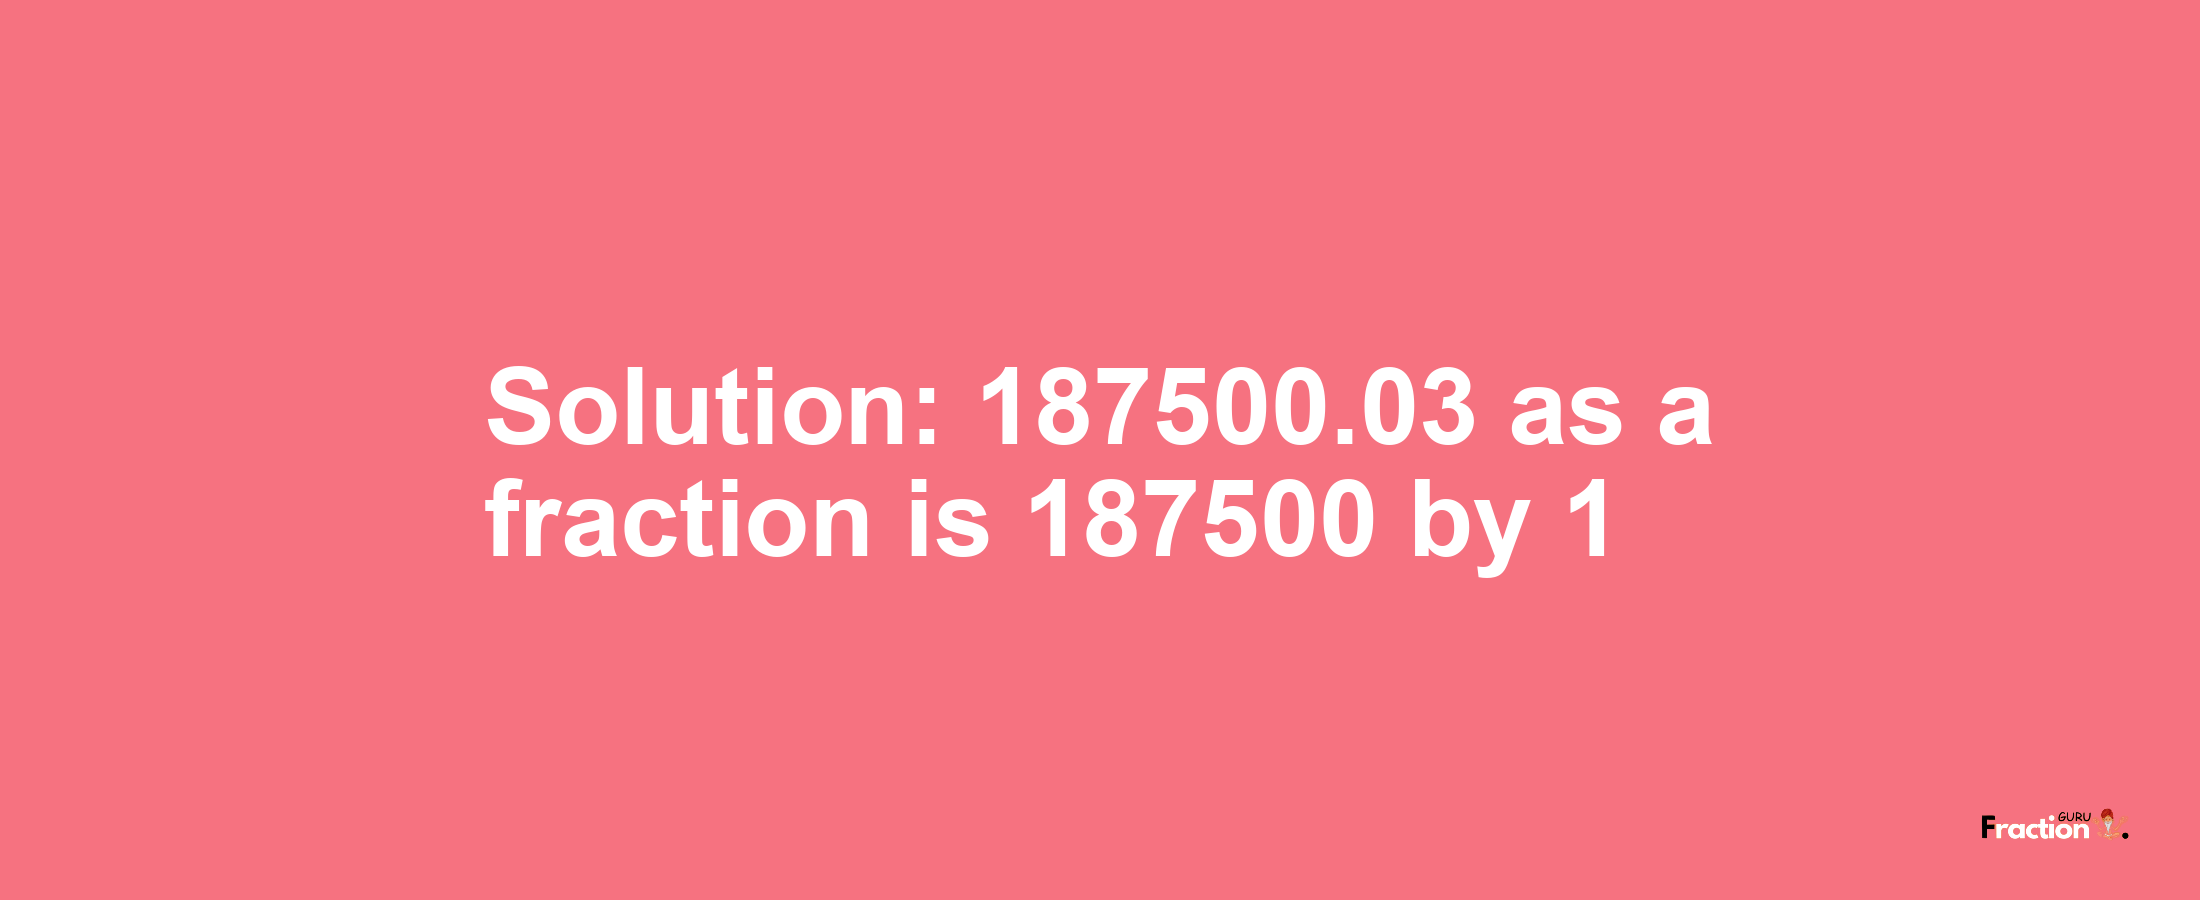 Solution:187500.03 as a fraction is 187500/1